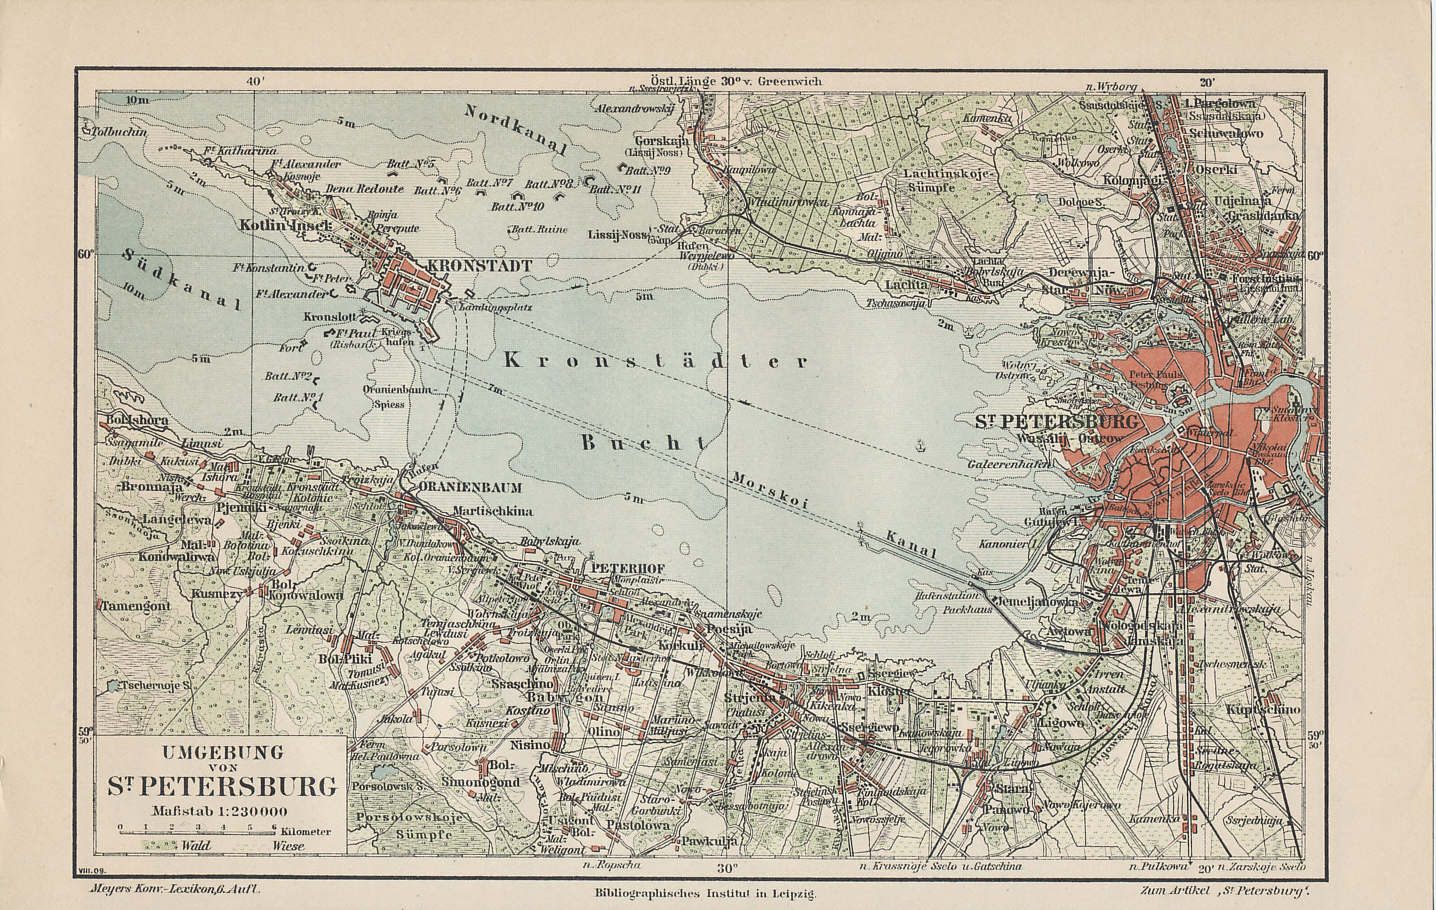 1898 map of Petrograd, the Russian capital, Kronstadt Bay, and the Russian naval base of Kronstadt, from a German atlas. Petersburg, or Petrograd, is on Kronstadt Bay, an extension of the Gulf of Finland on the Baltic Sea. Kronstadt was an important naval base. North and east of central Petrograd was the Vyborg district, site of many factories and housing for workers.